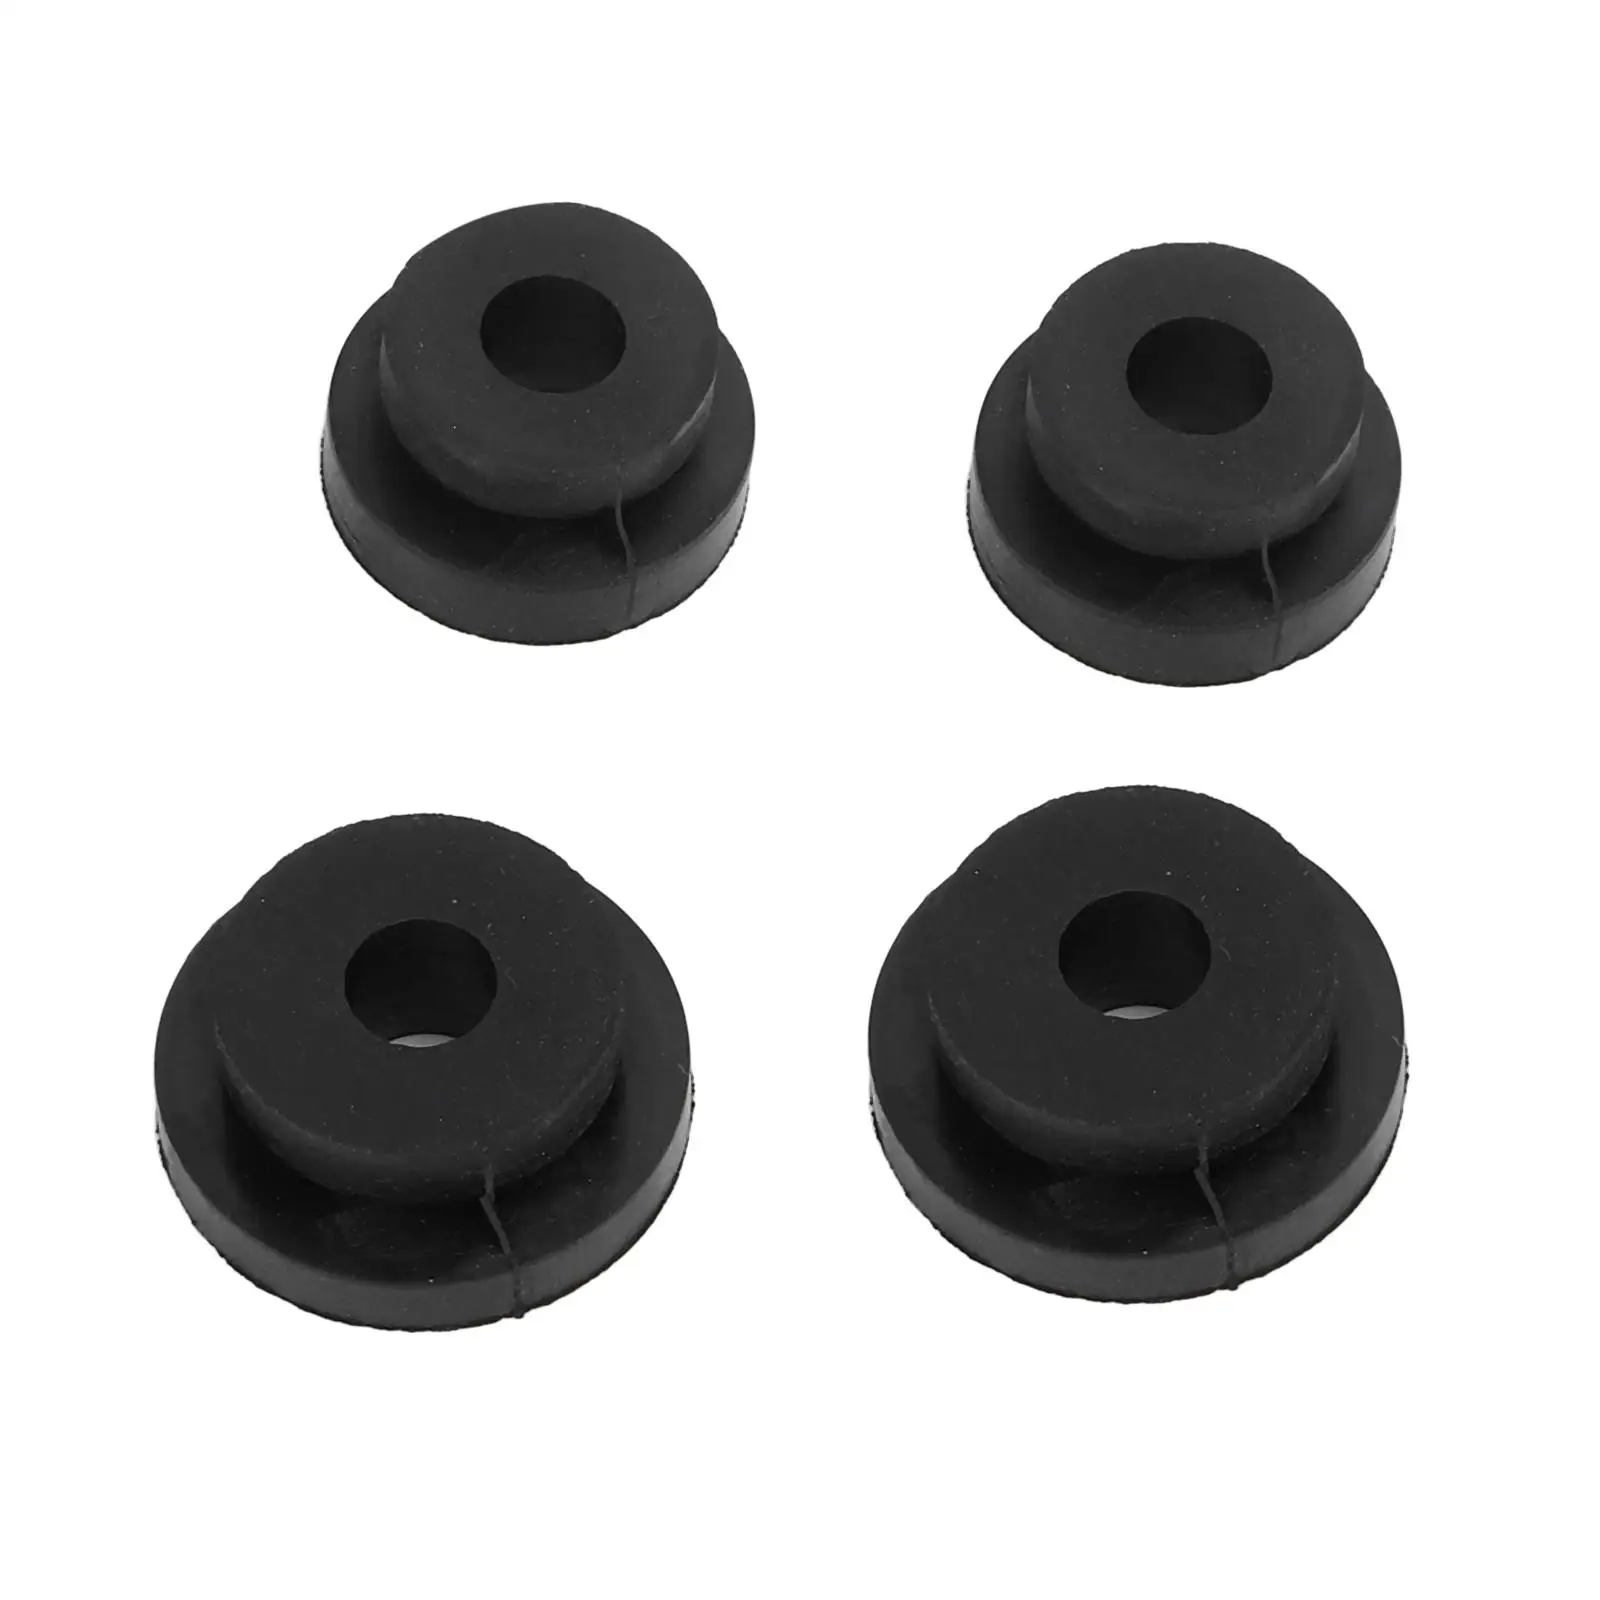 4x Black Radiator Mounting Rubber Grommets for Land Rover Discovery 1